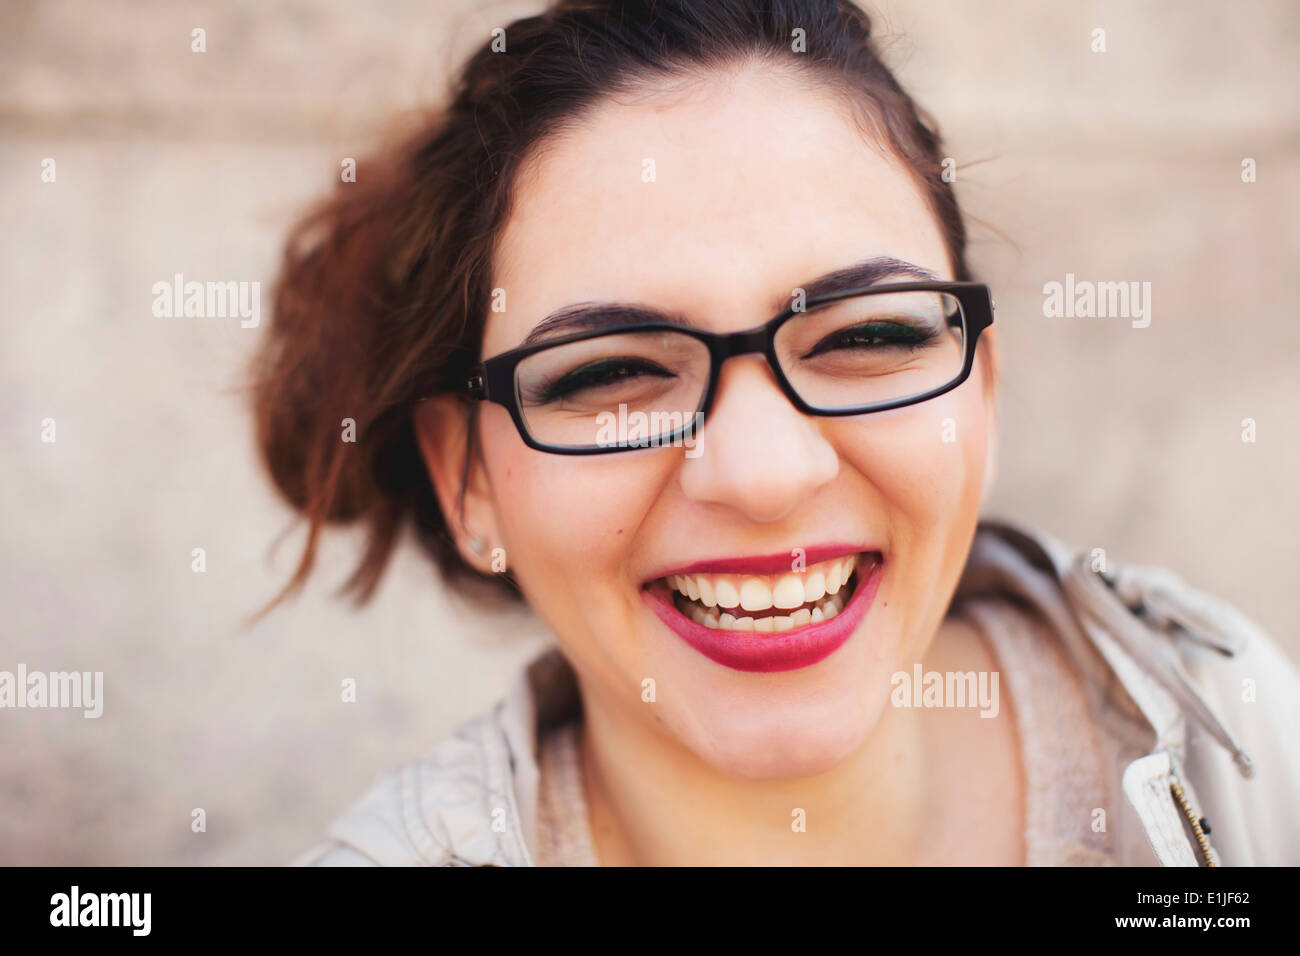 Close up portrait of young woman with toothy smile Stock Photo